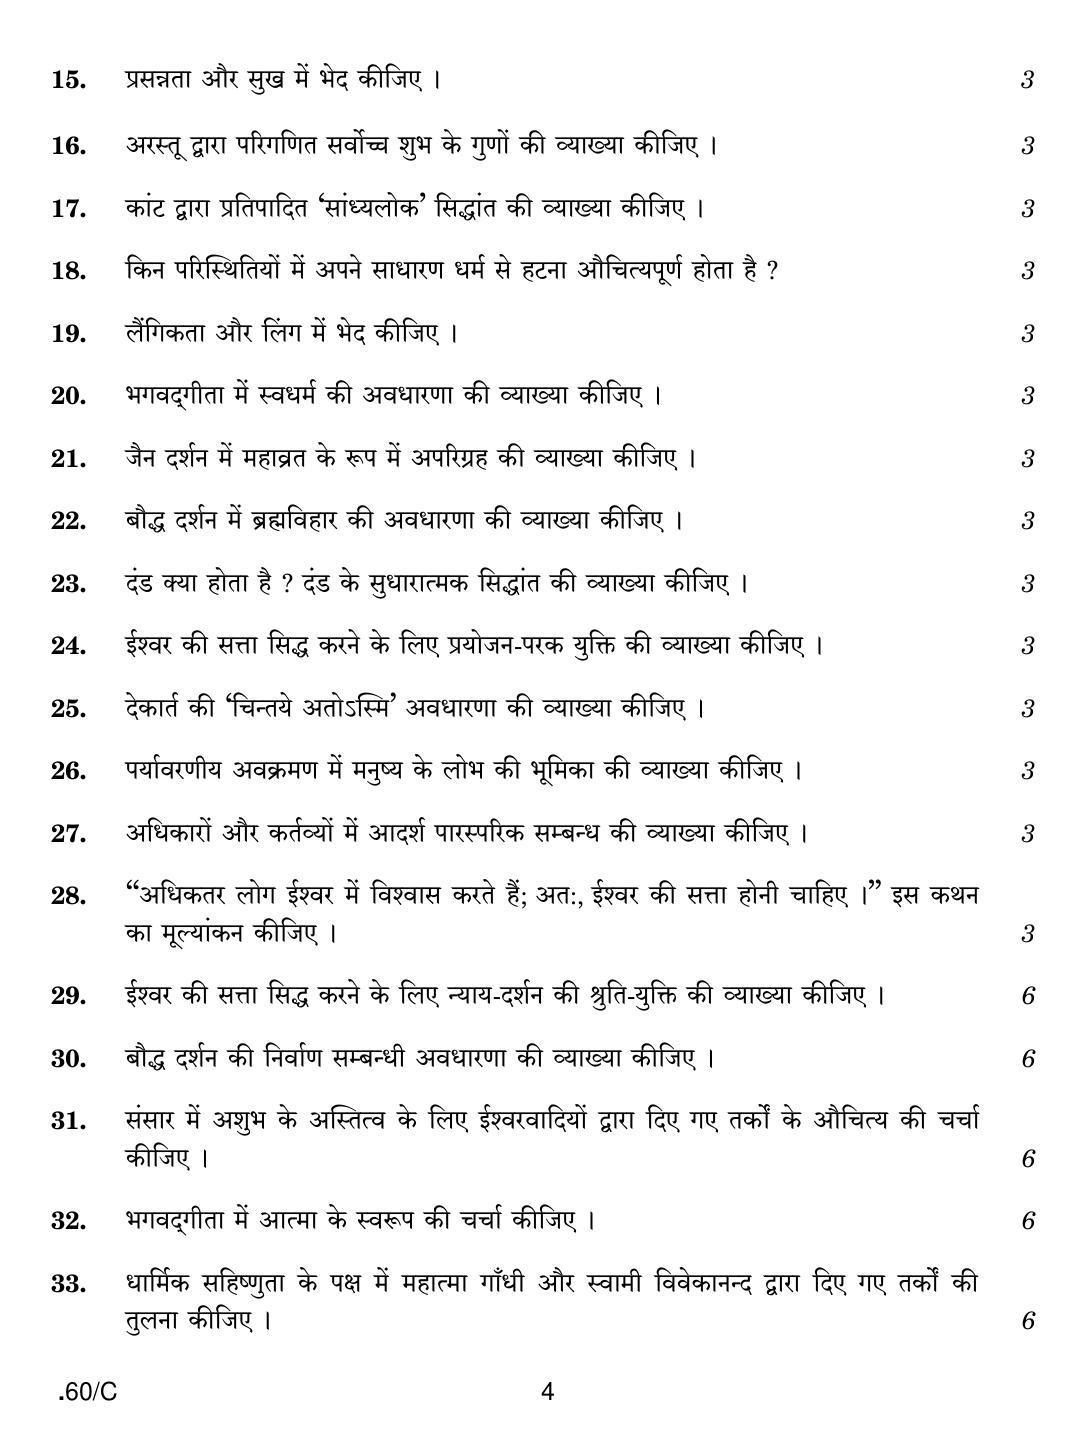 CBSE Class 12 Philosophy 2020 Compartment Question Paper - Page 4